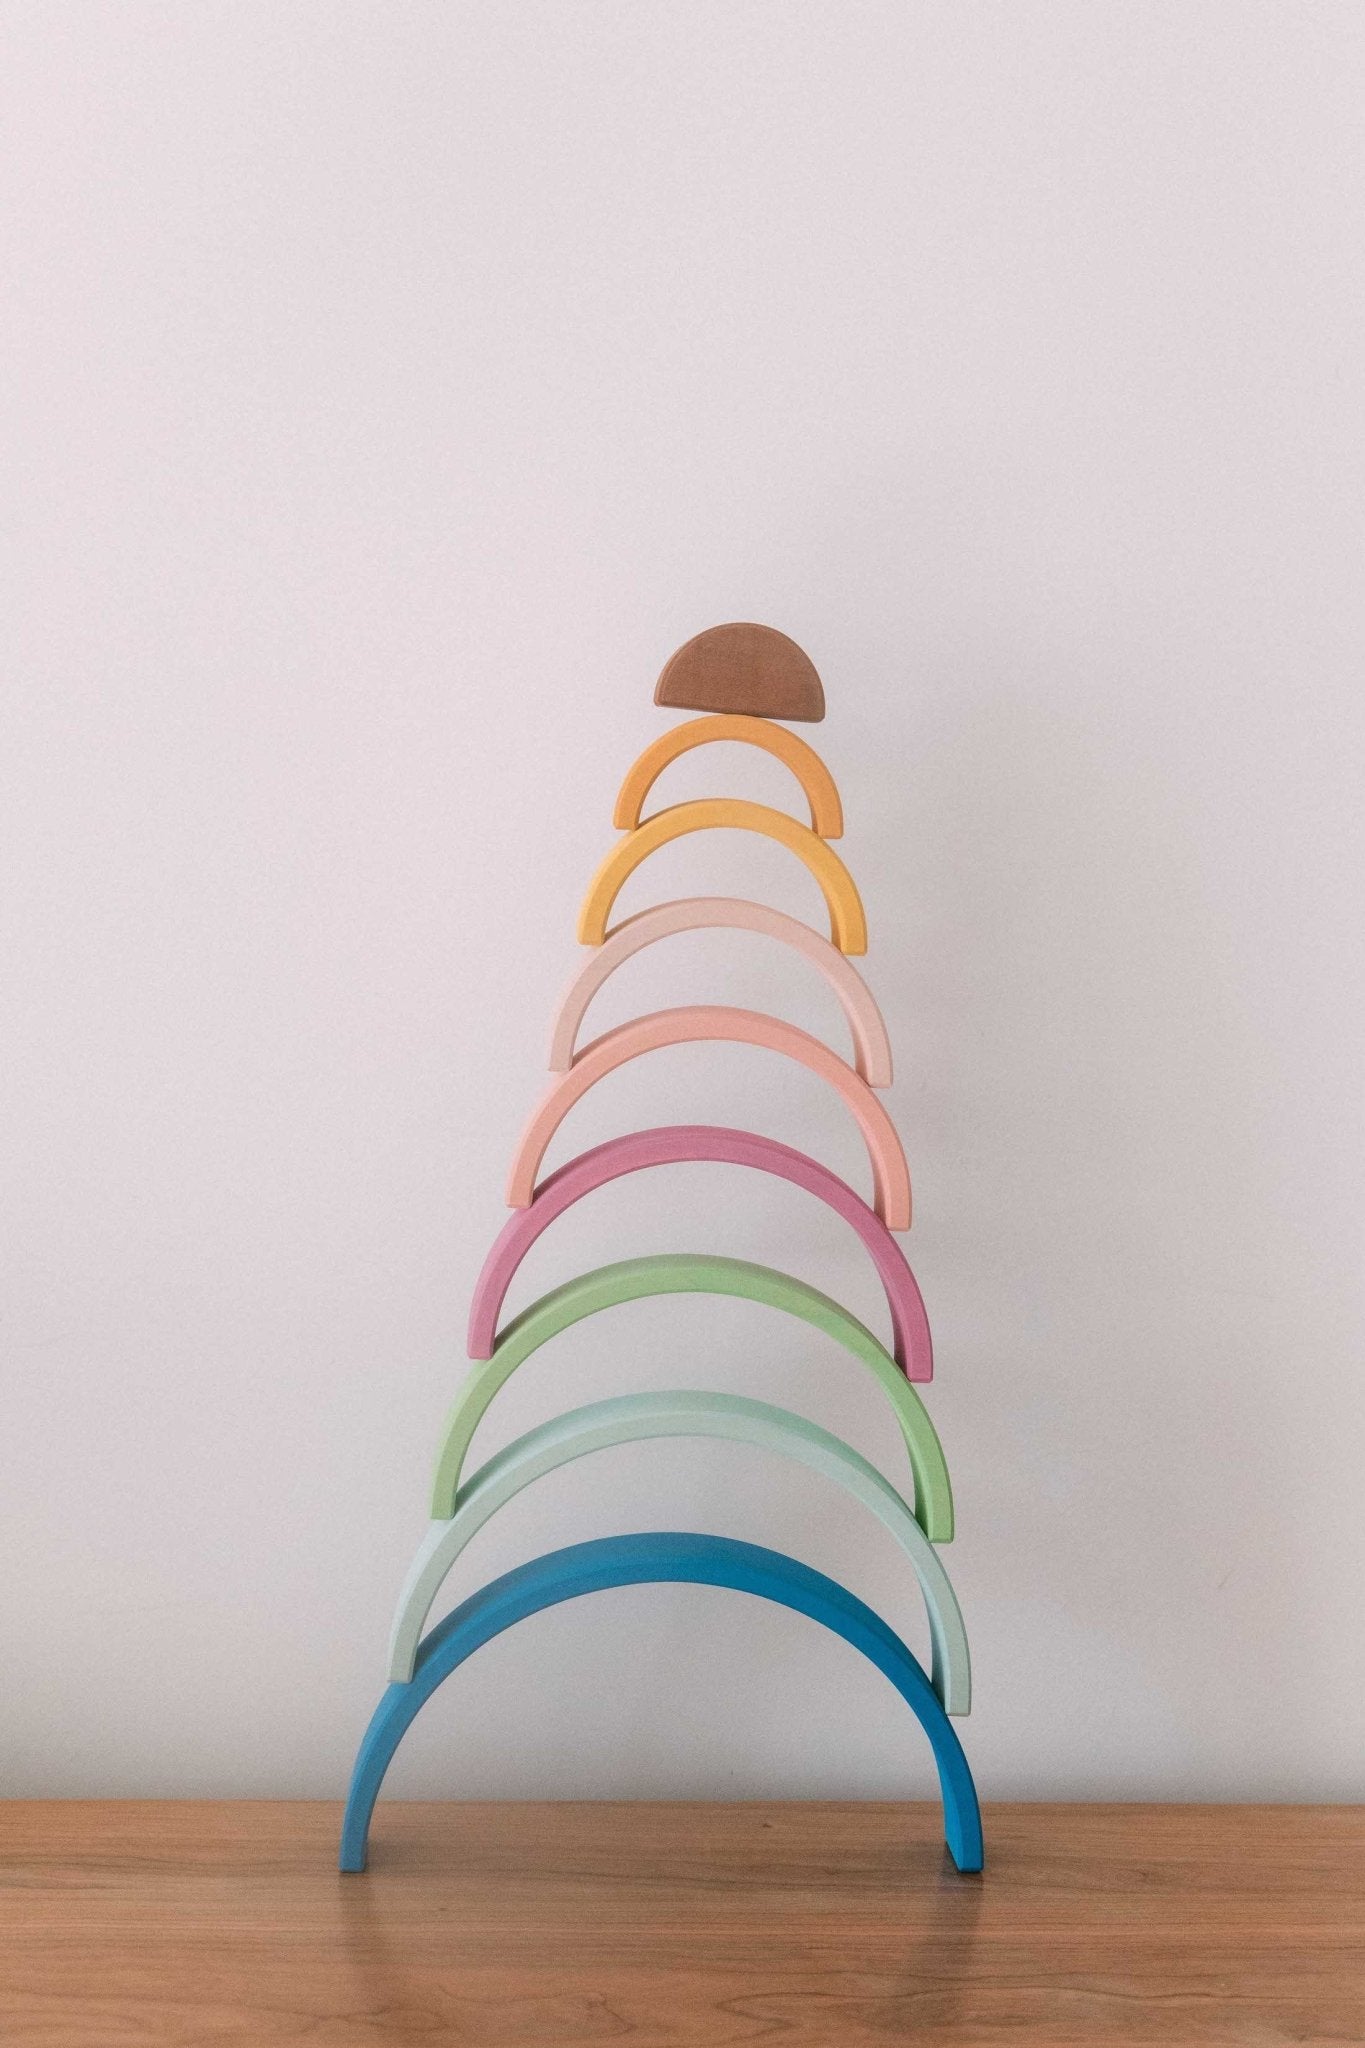 Medium Pastel Rainbow Stacker by Avdar - Wood Wood Toys Canada's Favourite Montessori Toy Store